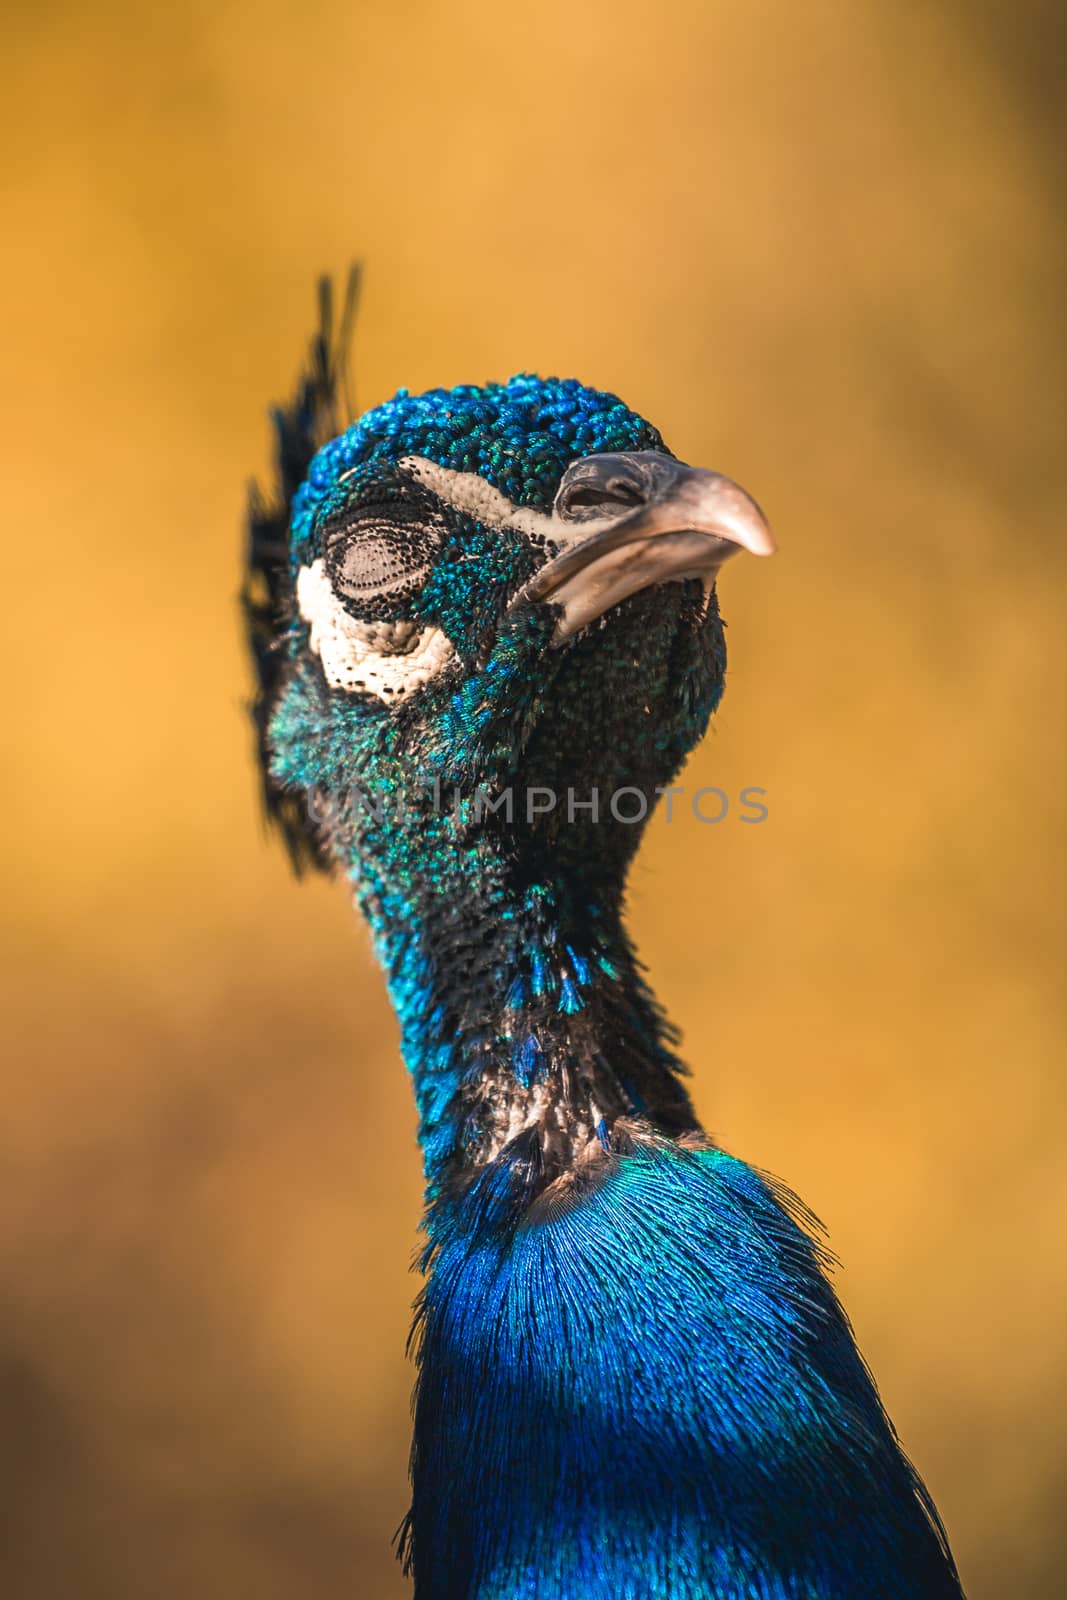 Nice proud peacock head with blue feathers on a soft background